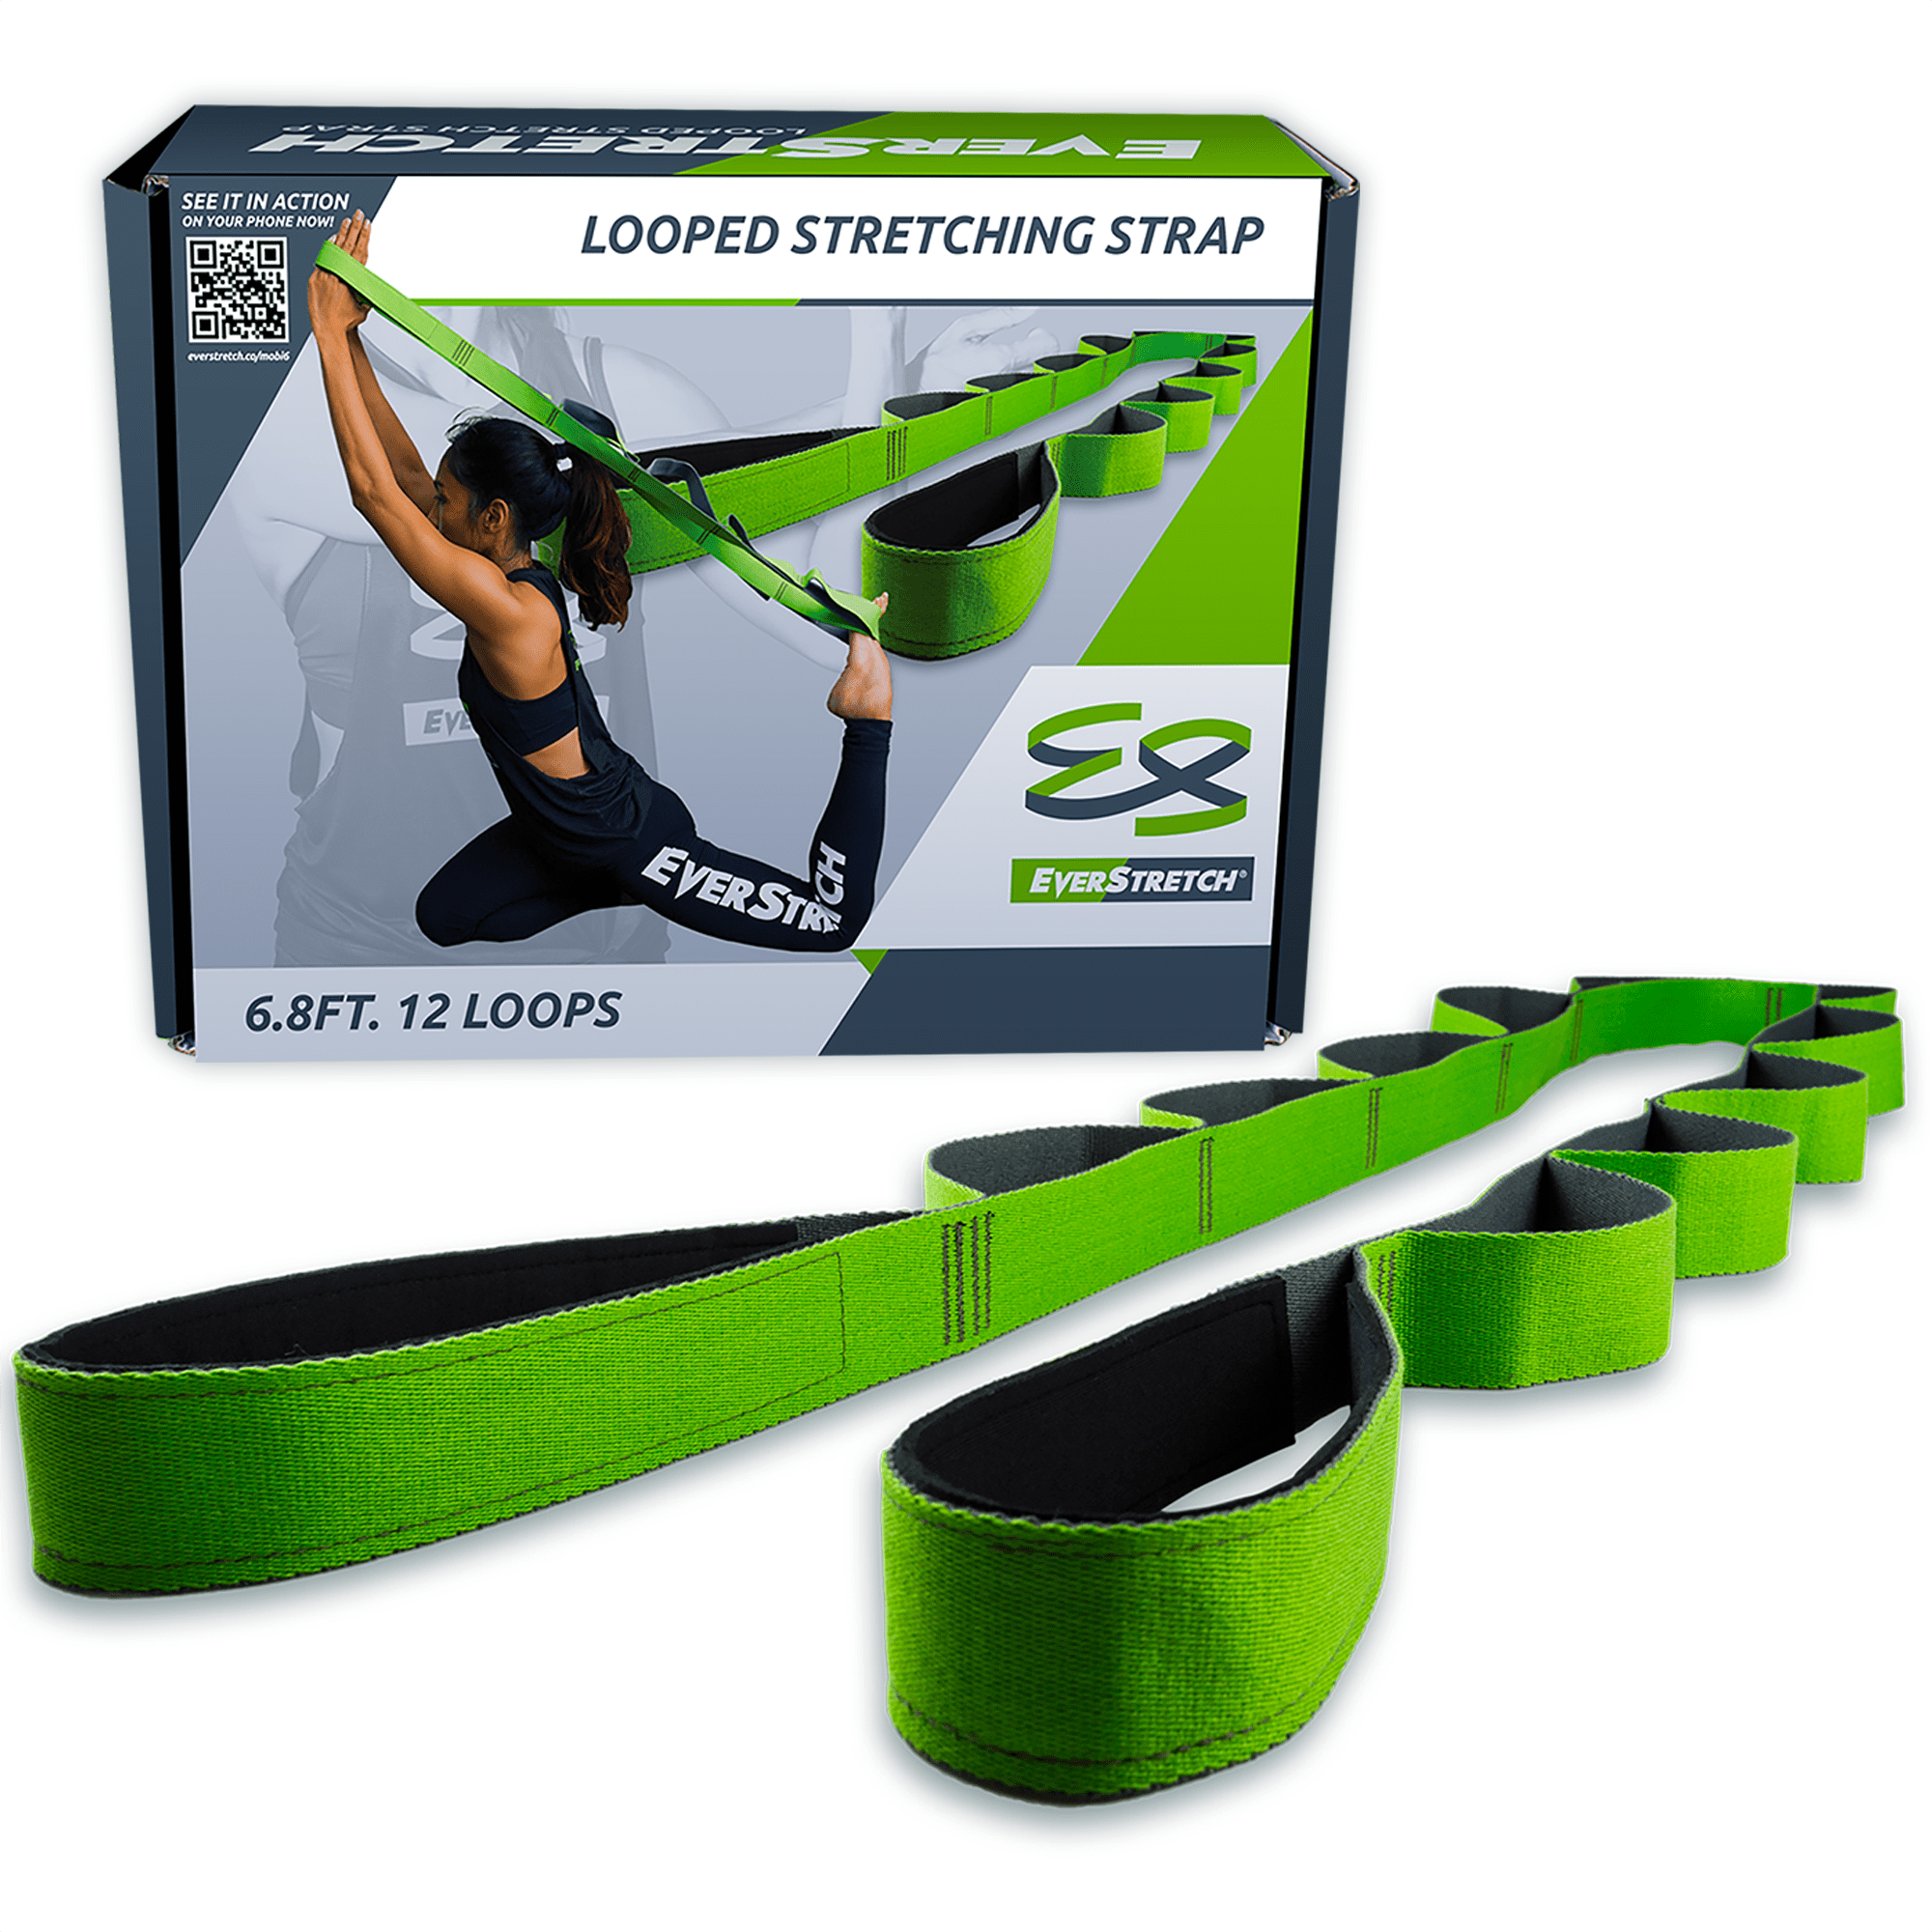 EverStretch Non-Elastic Stretching Strap with Loops - Premium